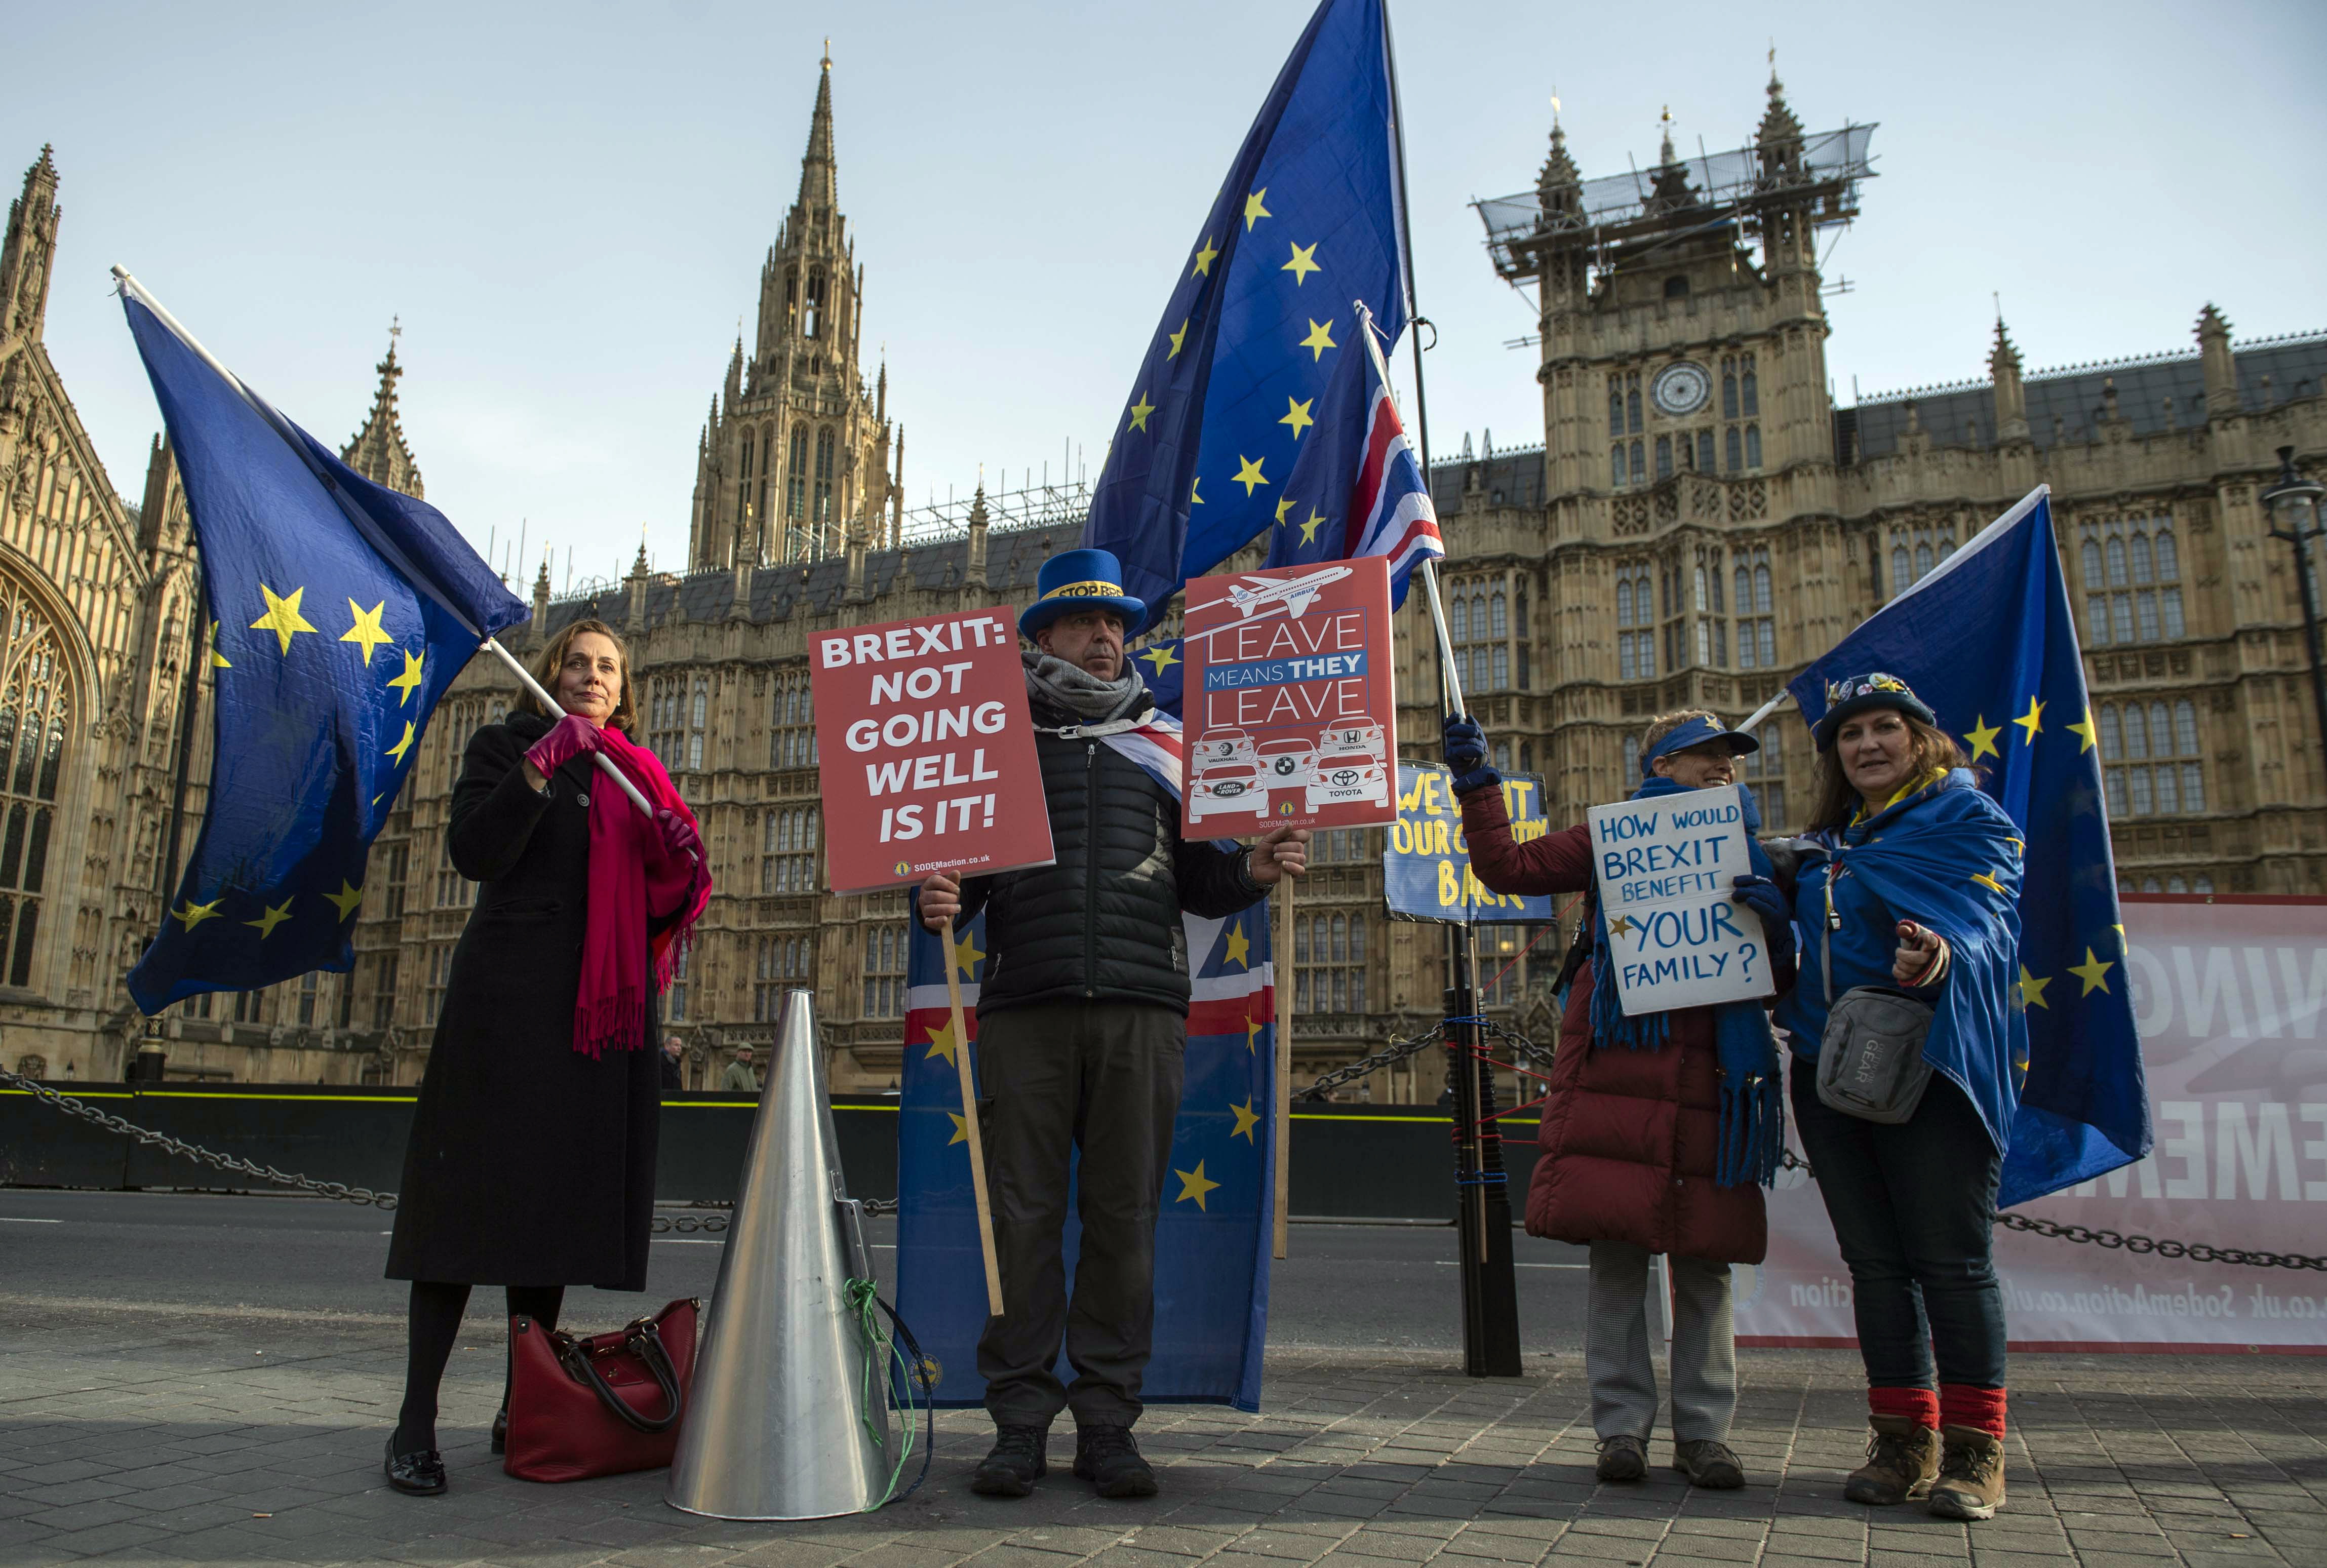 epa07329384 Pro EU campaigners outside parliament in London, Britain, 29 January 2019. The House of Commons is set to vote on amendments to British Prime Minister May's Brexit plan in parliament on 29 January.  EPA/WILL OLIVER